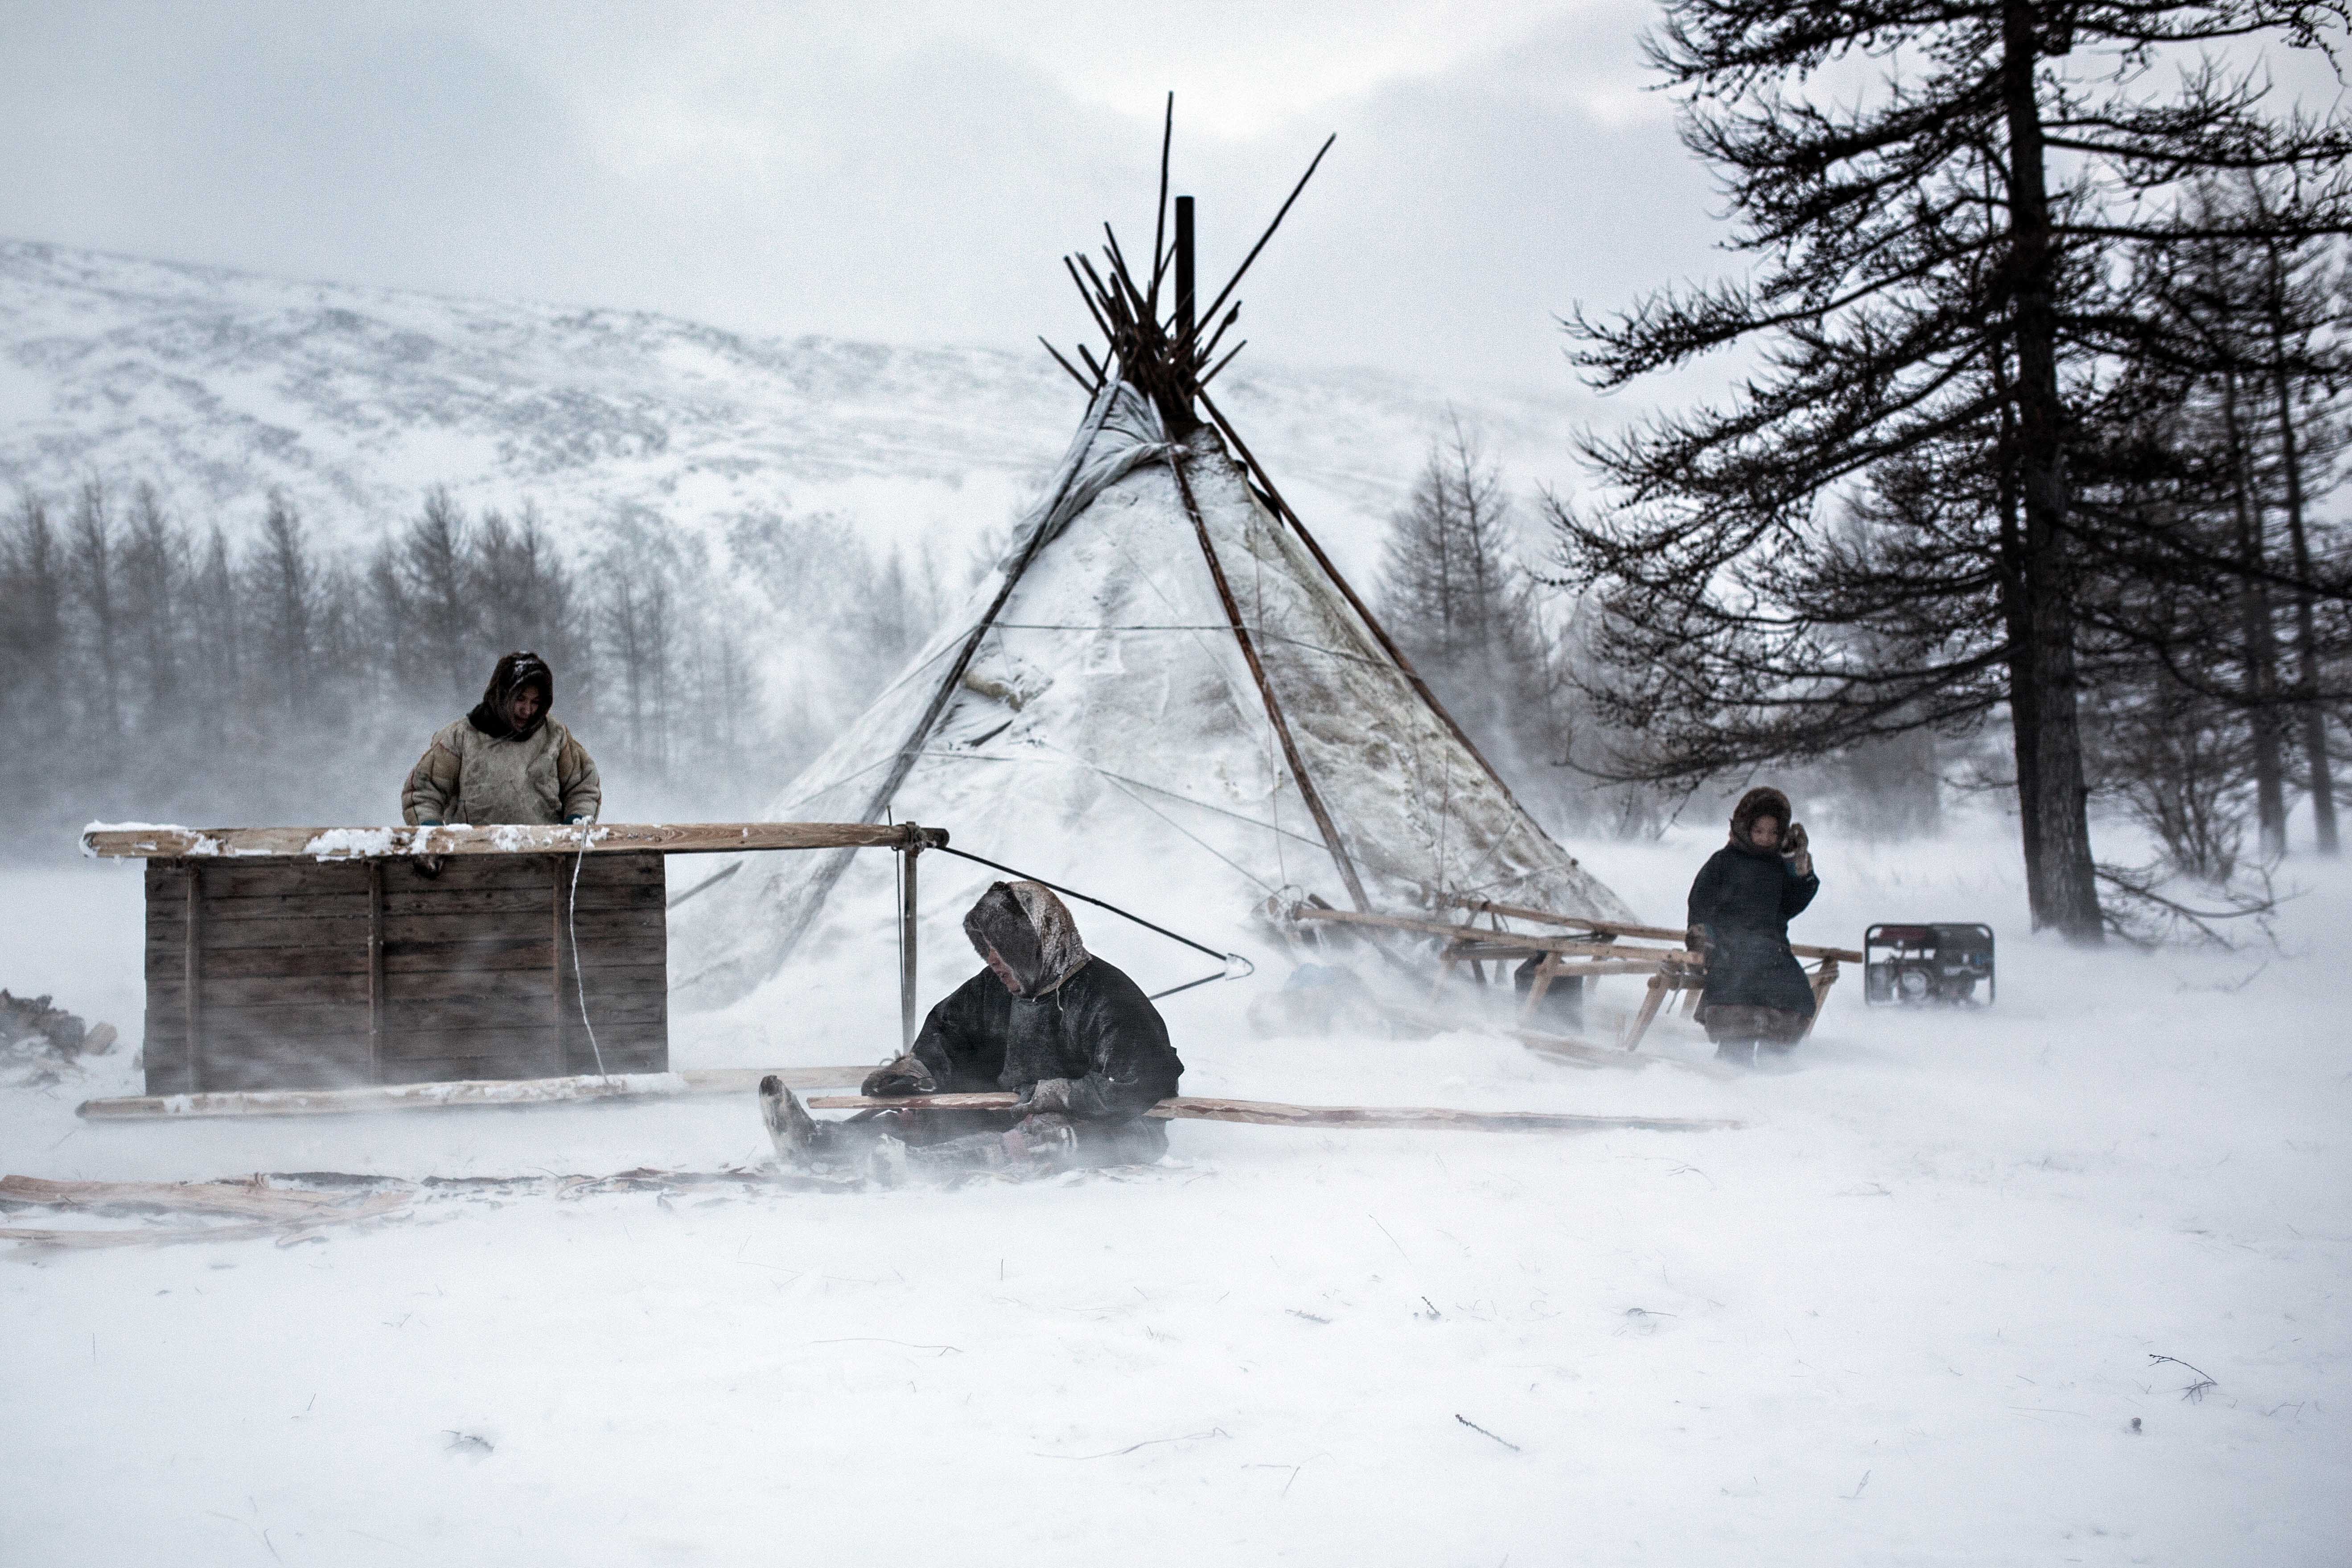 During winters, these Nomads slow down their migration towards green pastures setting for several days in the camp. Chums (tents), made by wooden sticks and reindeer skin, are built in couple of hours to protect them from the strength of nature.